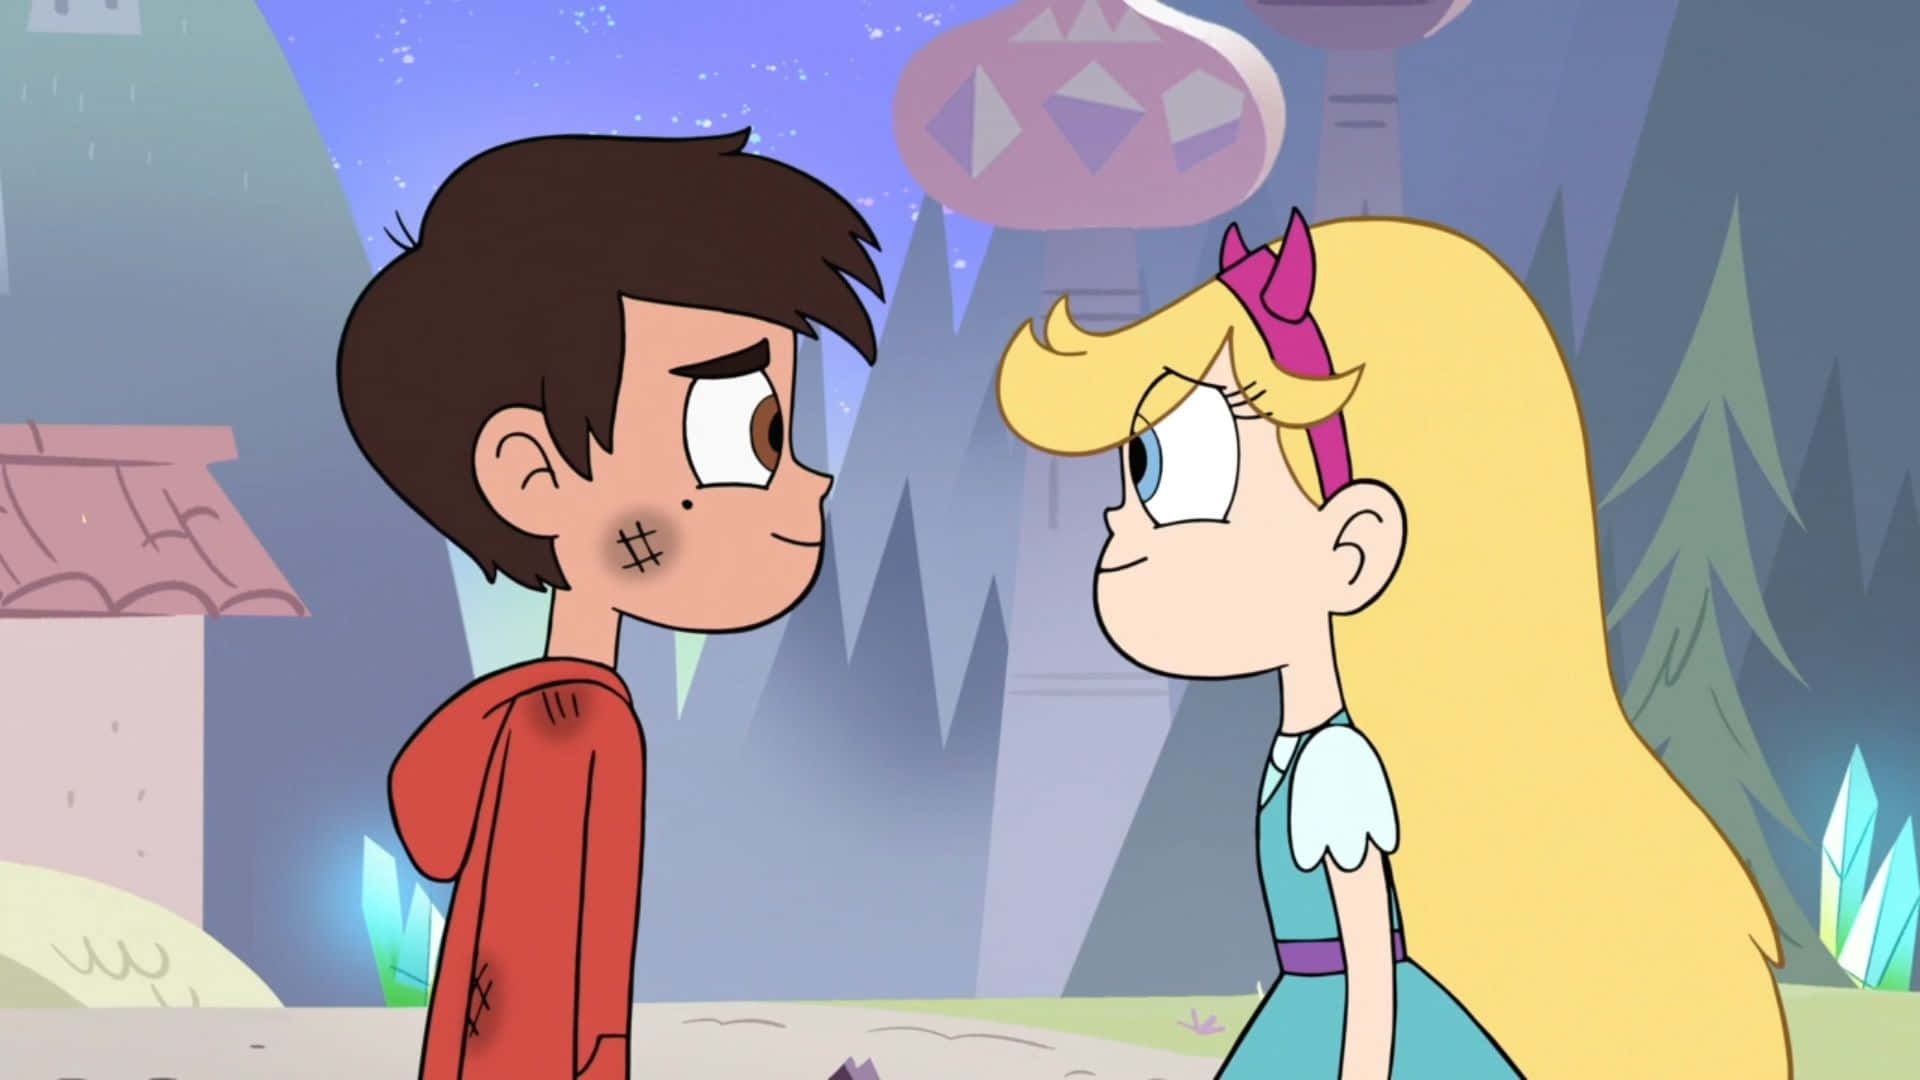 Star Butterfly and Marco Diaz in an action-packed adventure